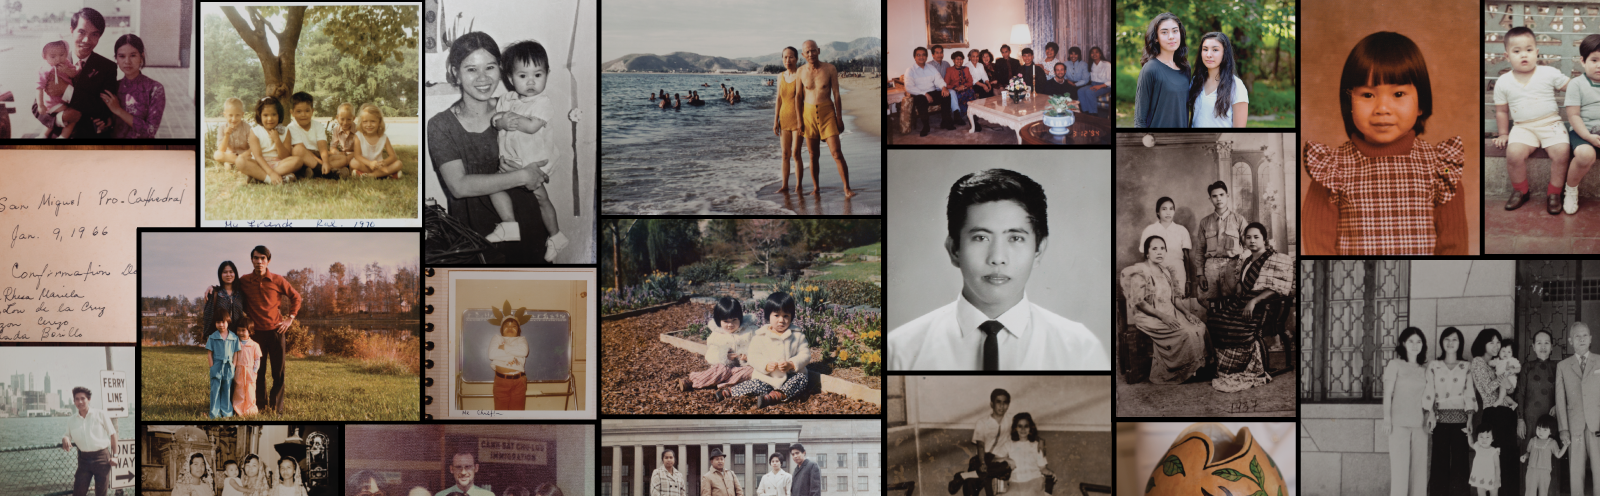 Collage of vintage photographs of Asian American people